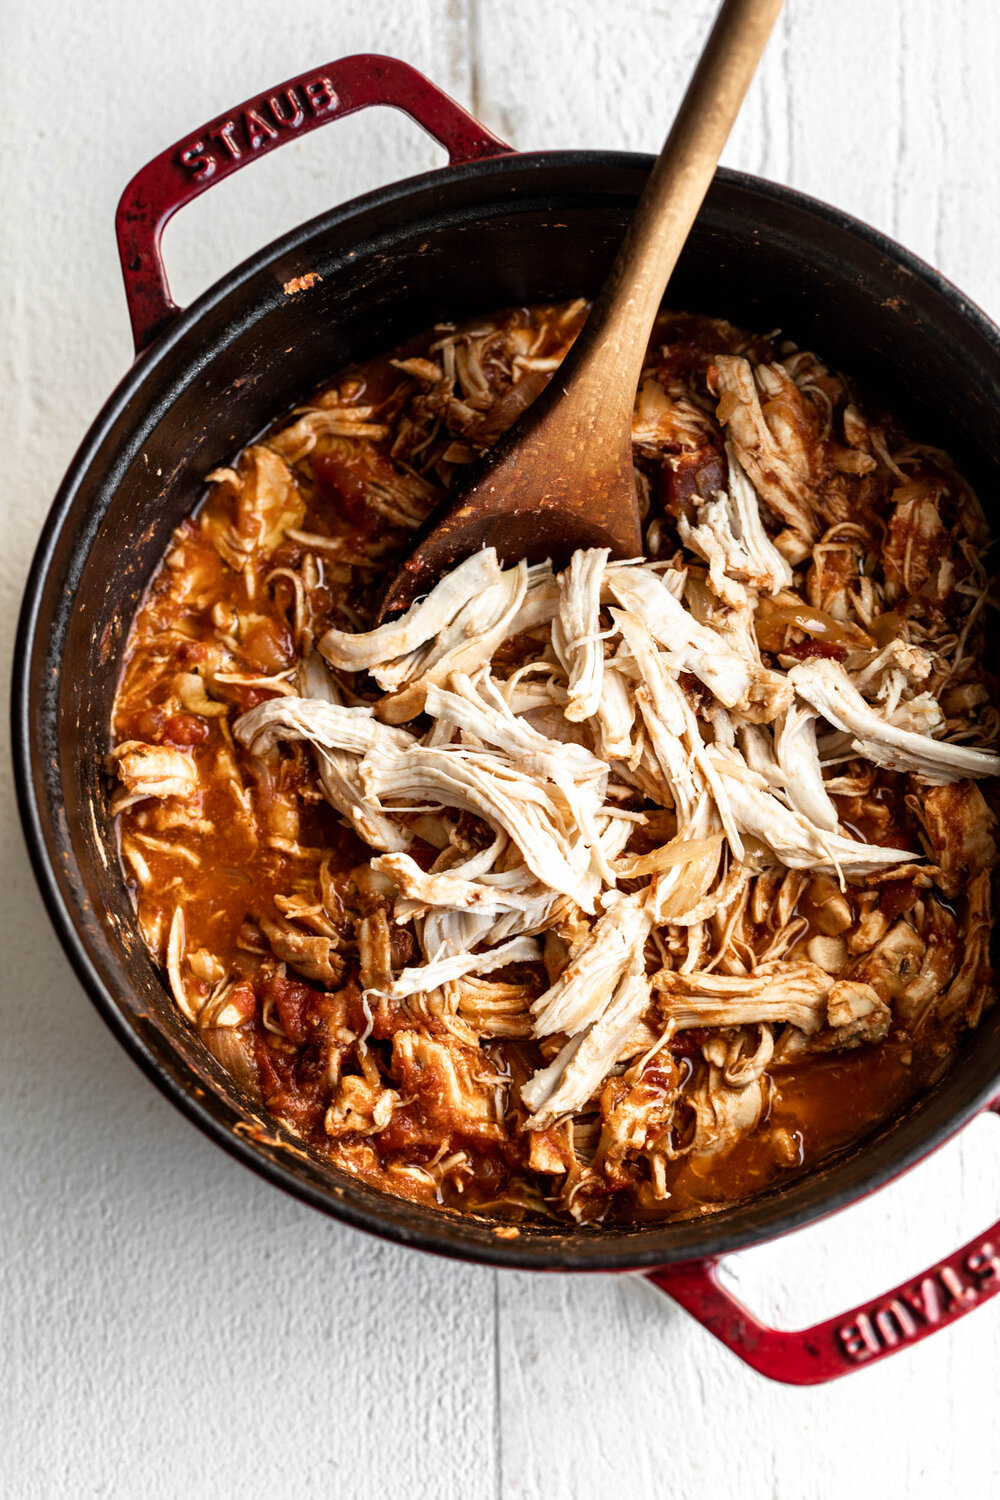 shredded chicken breasts in tinga sauce